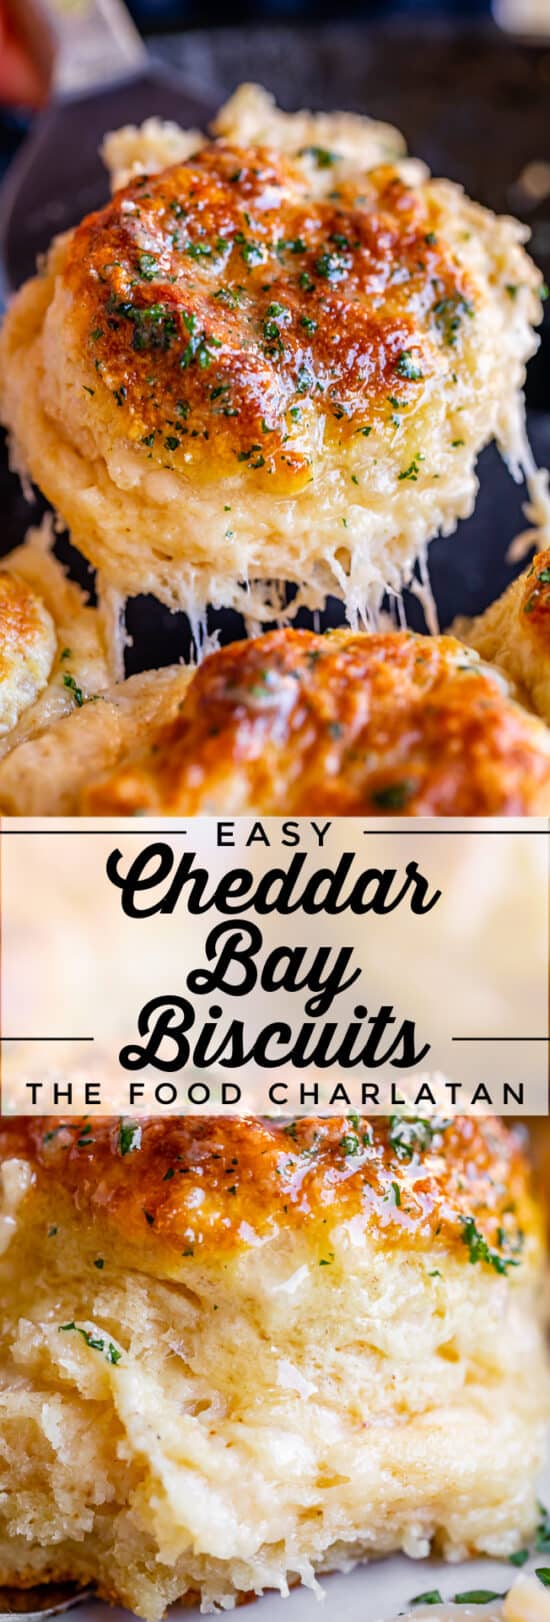 cheddar biscuits from red lobster